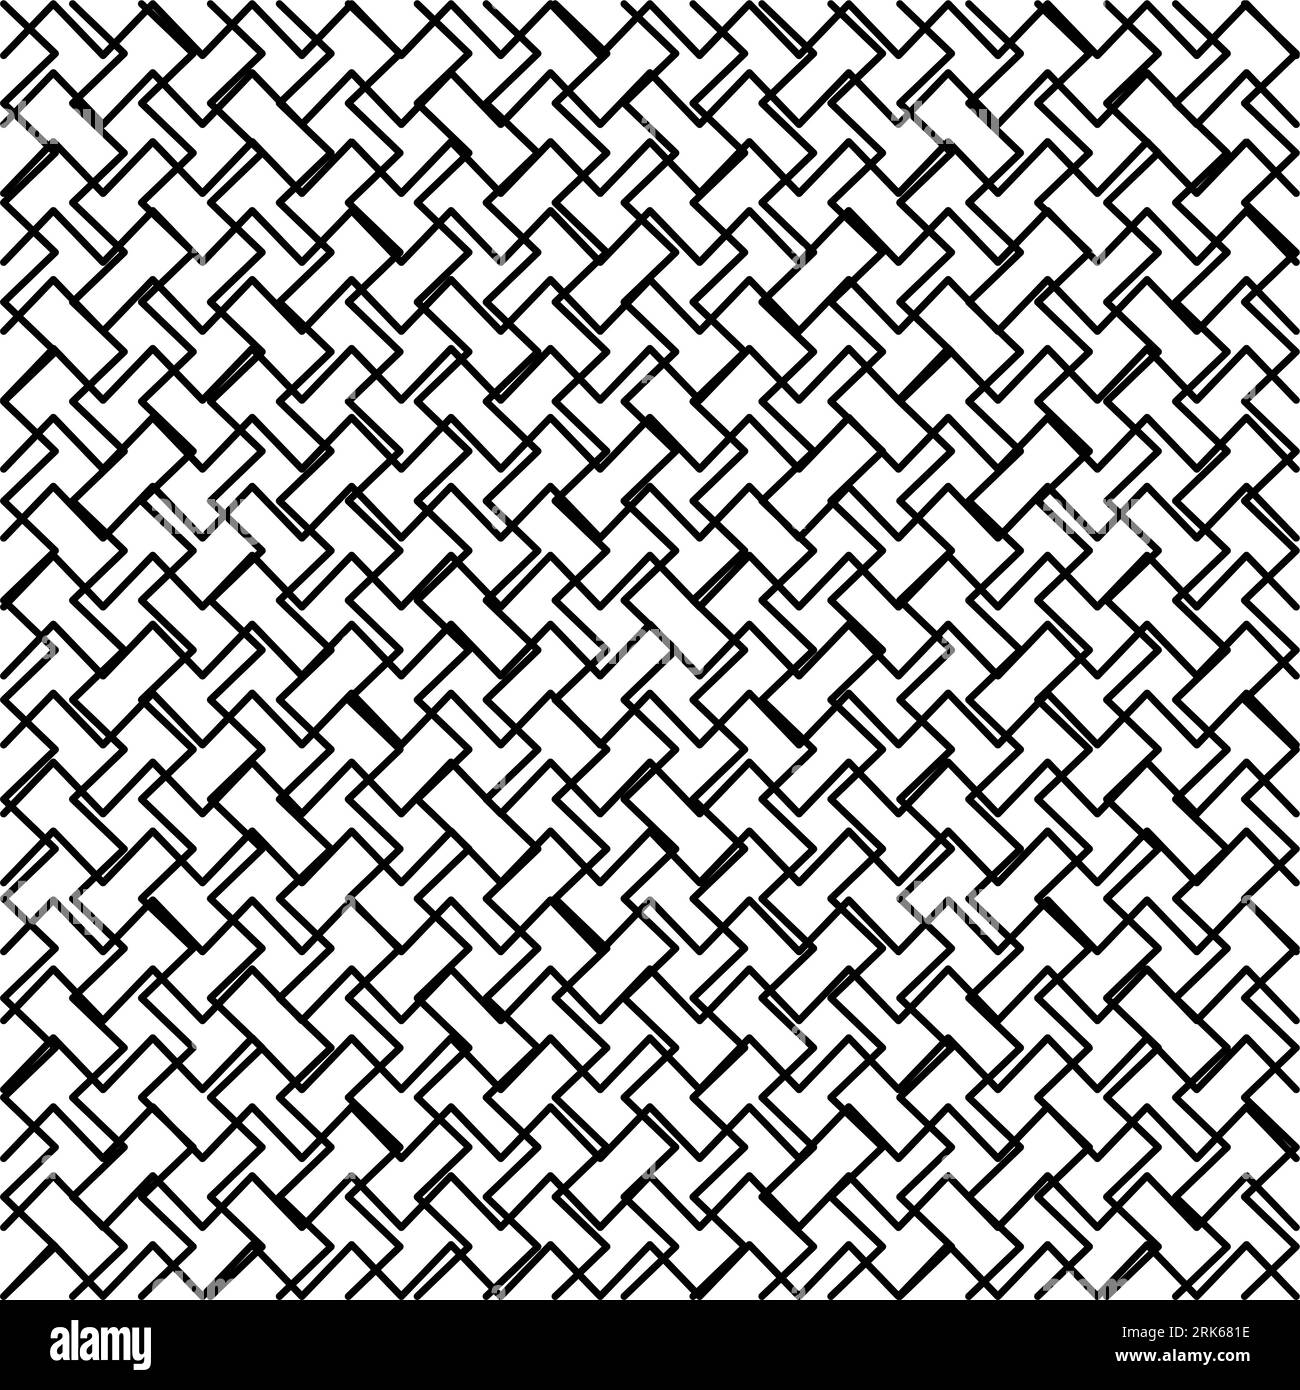 Geometric simple black and white minimalistic pattern, diagonal thin lines. Can be used as wallpaper, background, or texture. Stock Vector